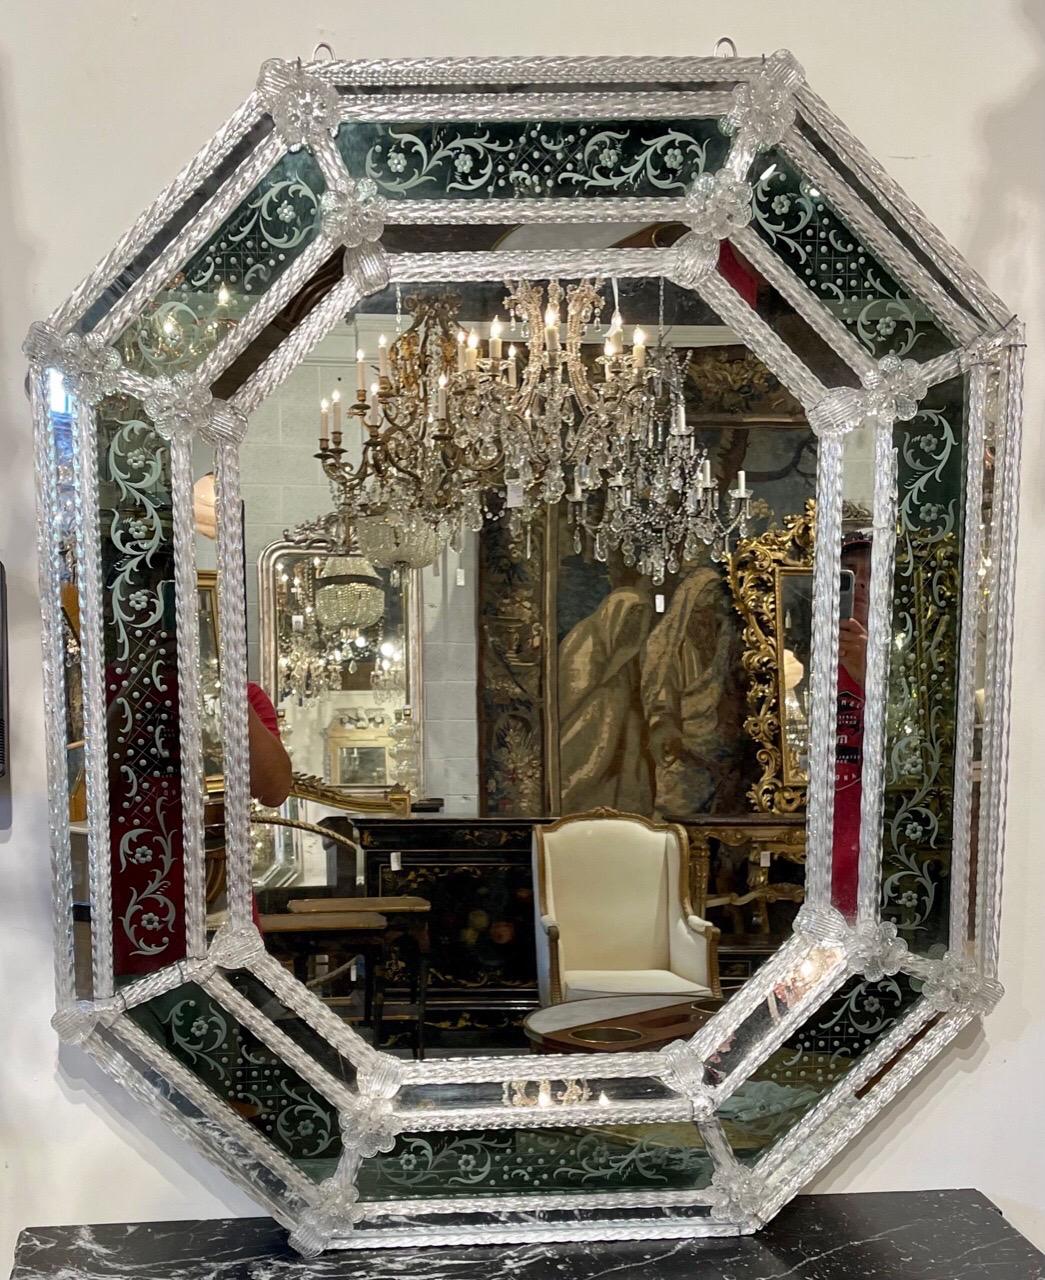 Lovely antique octagonal Venetian mirror. The piece has a beautiful etched mirror and Venetian glass on the borders including flowers. Very nice! Note: There are a few flowers that are missing that will be restored prior to shipping.